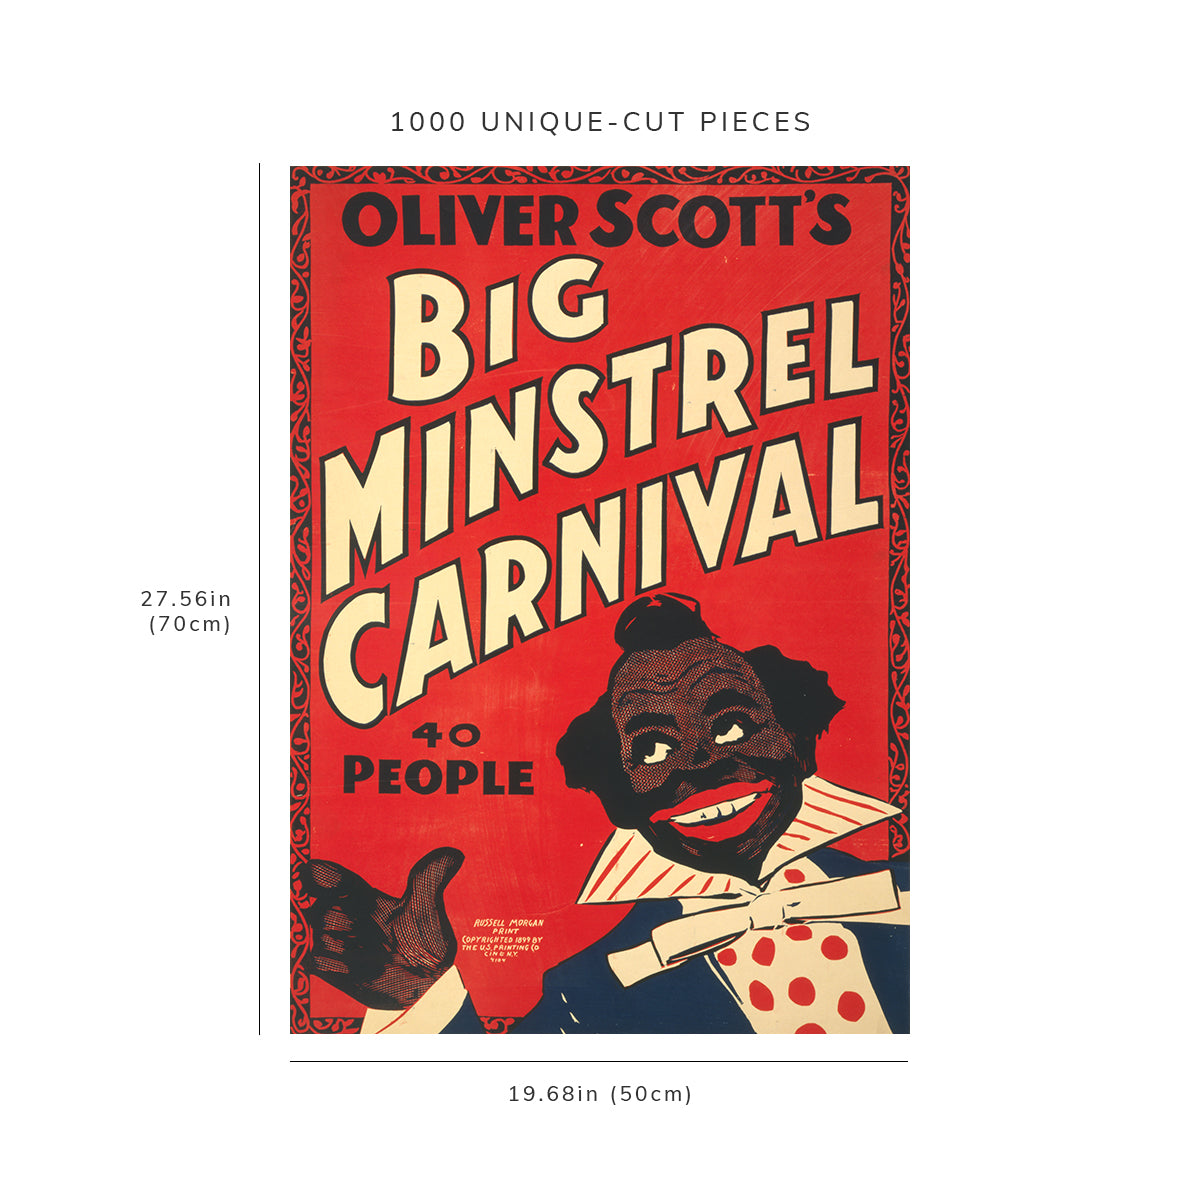 1000 piece puzzle - Oliver Scott's Big Minstrel Carnival 40 people | Birthday Present Gifts